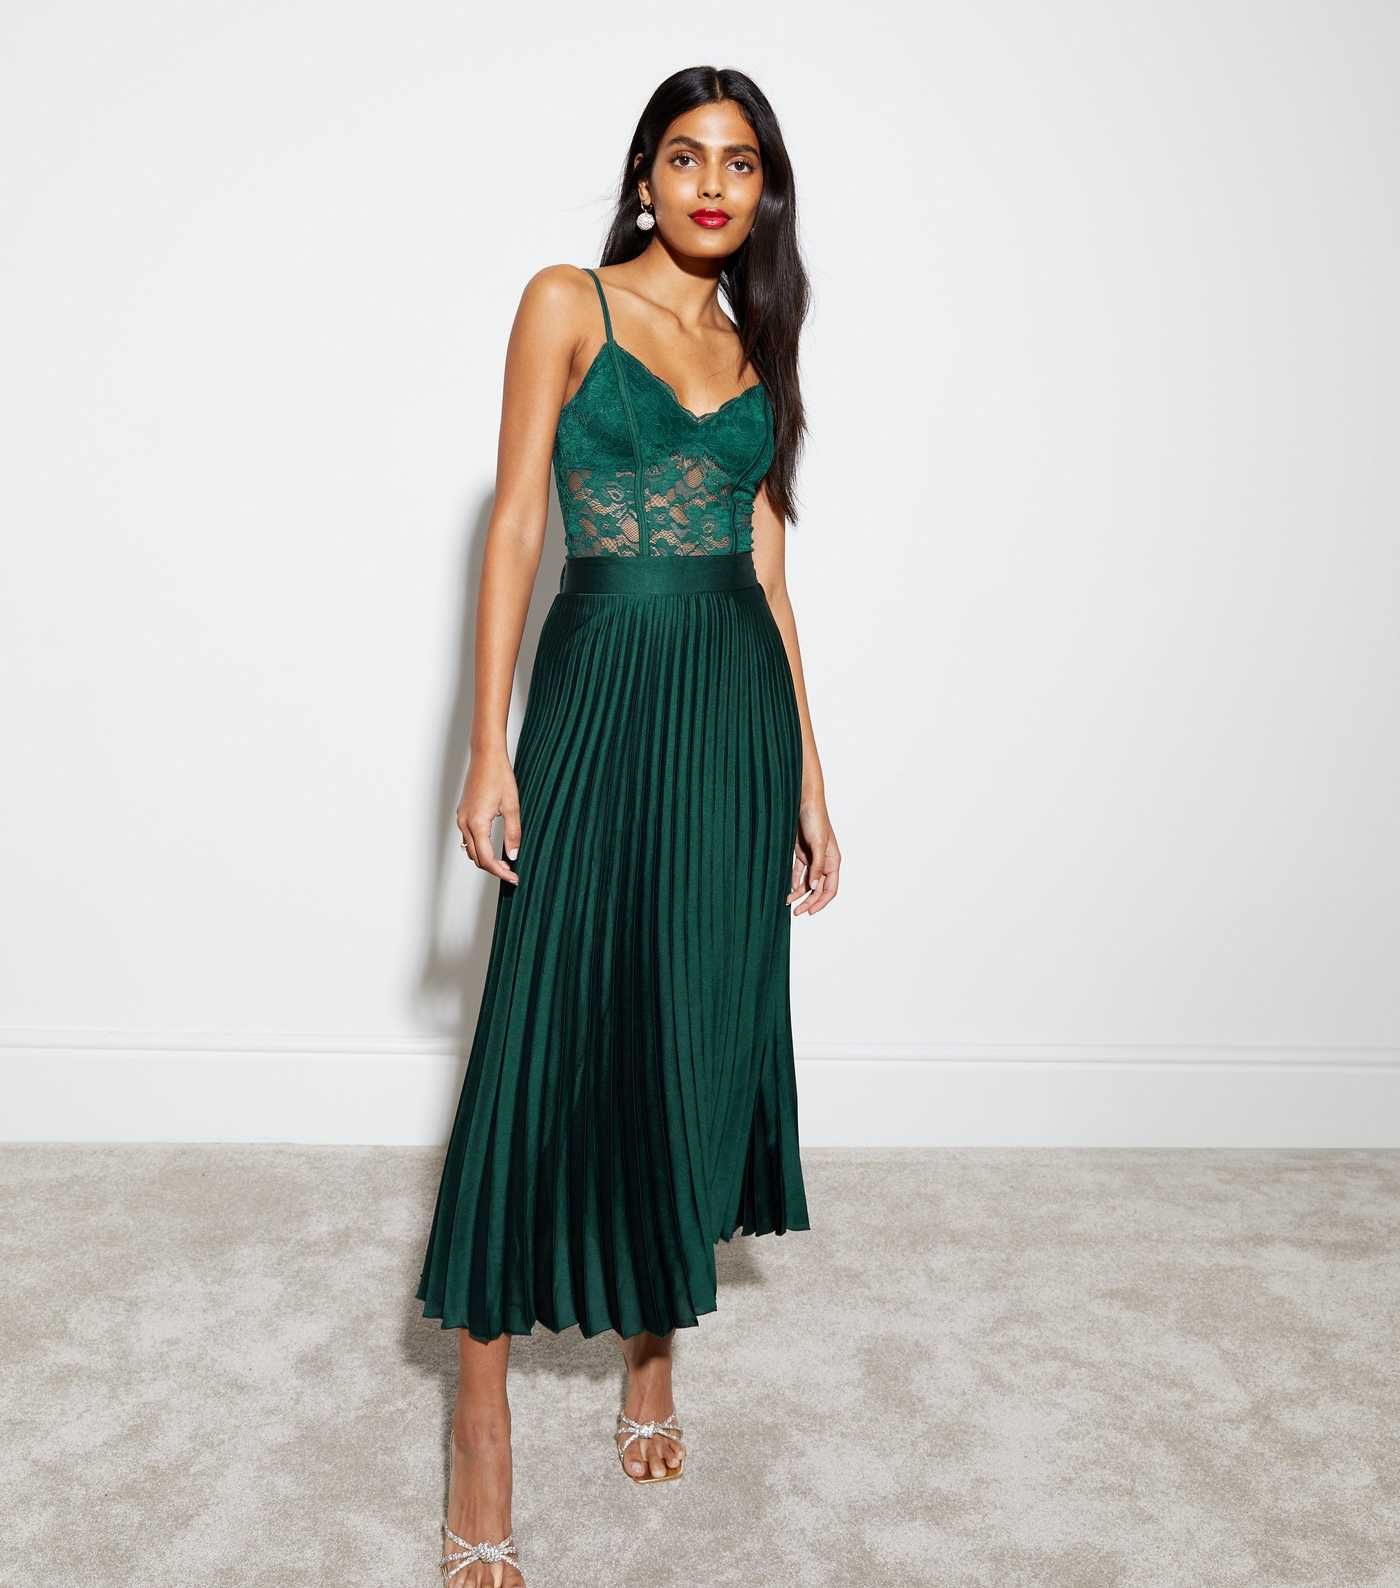 Dark Green Satin Pleated Midi Skirt
						
						Add to Saved Items
						Remove from Saved Items | New Look (UK)